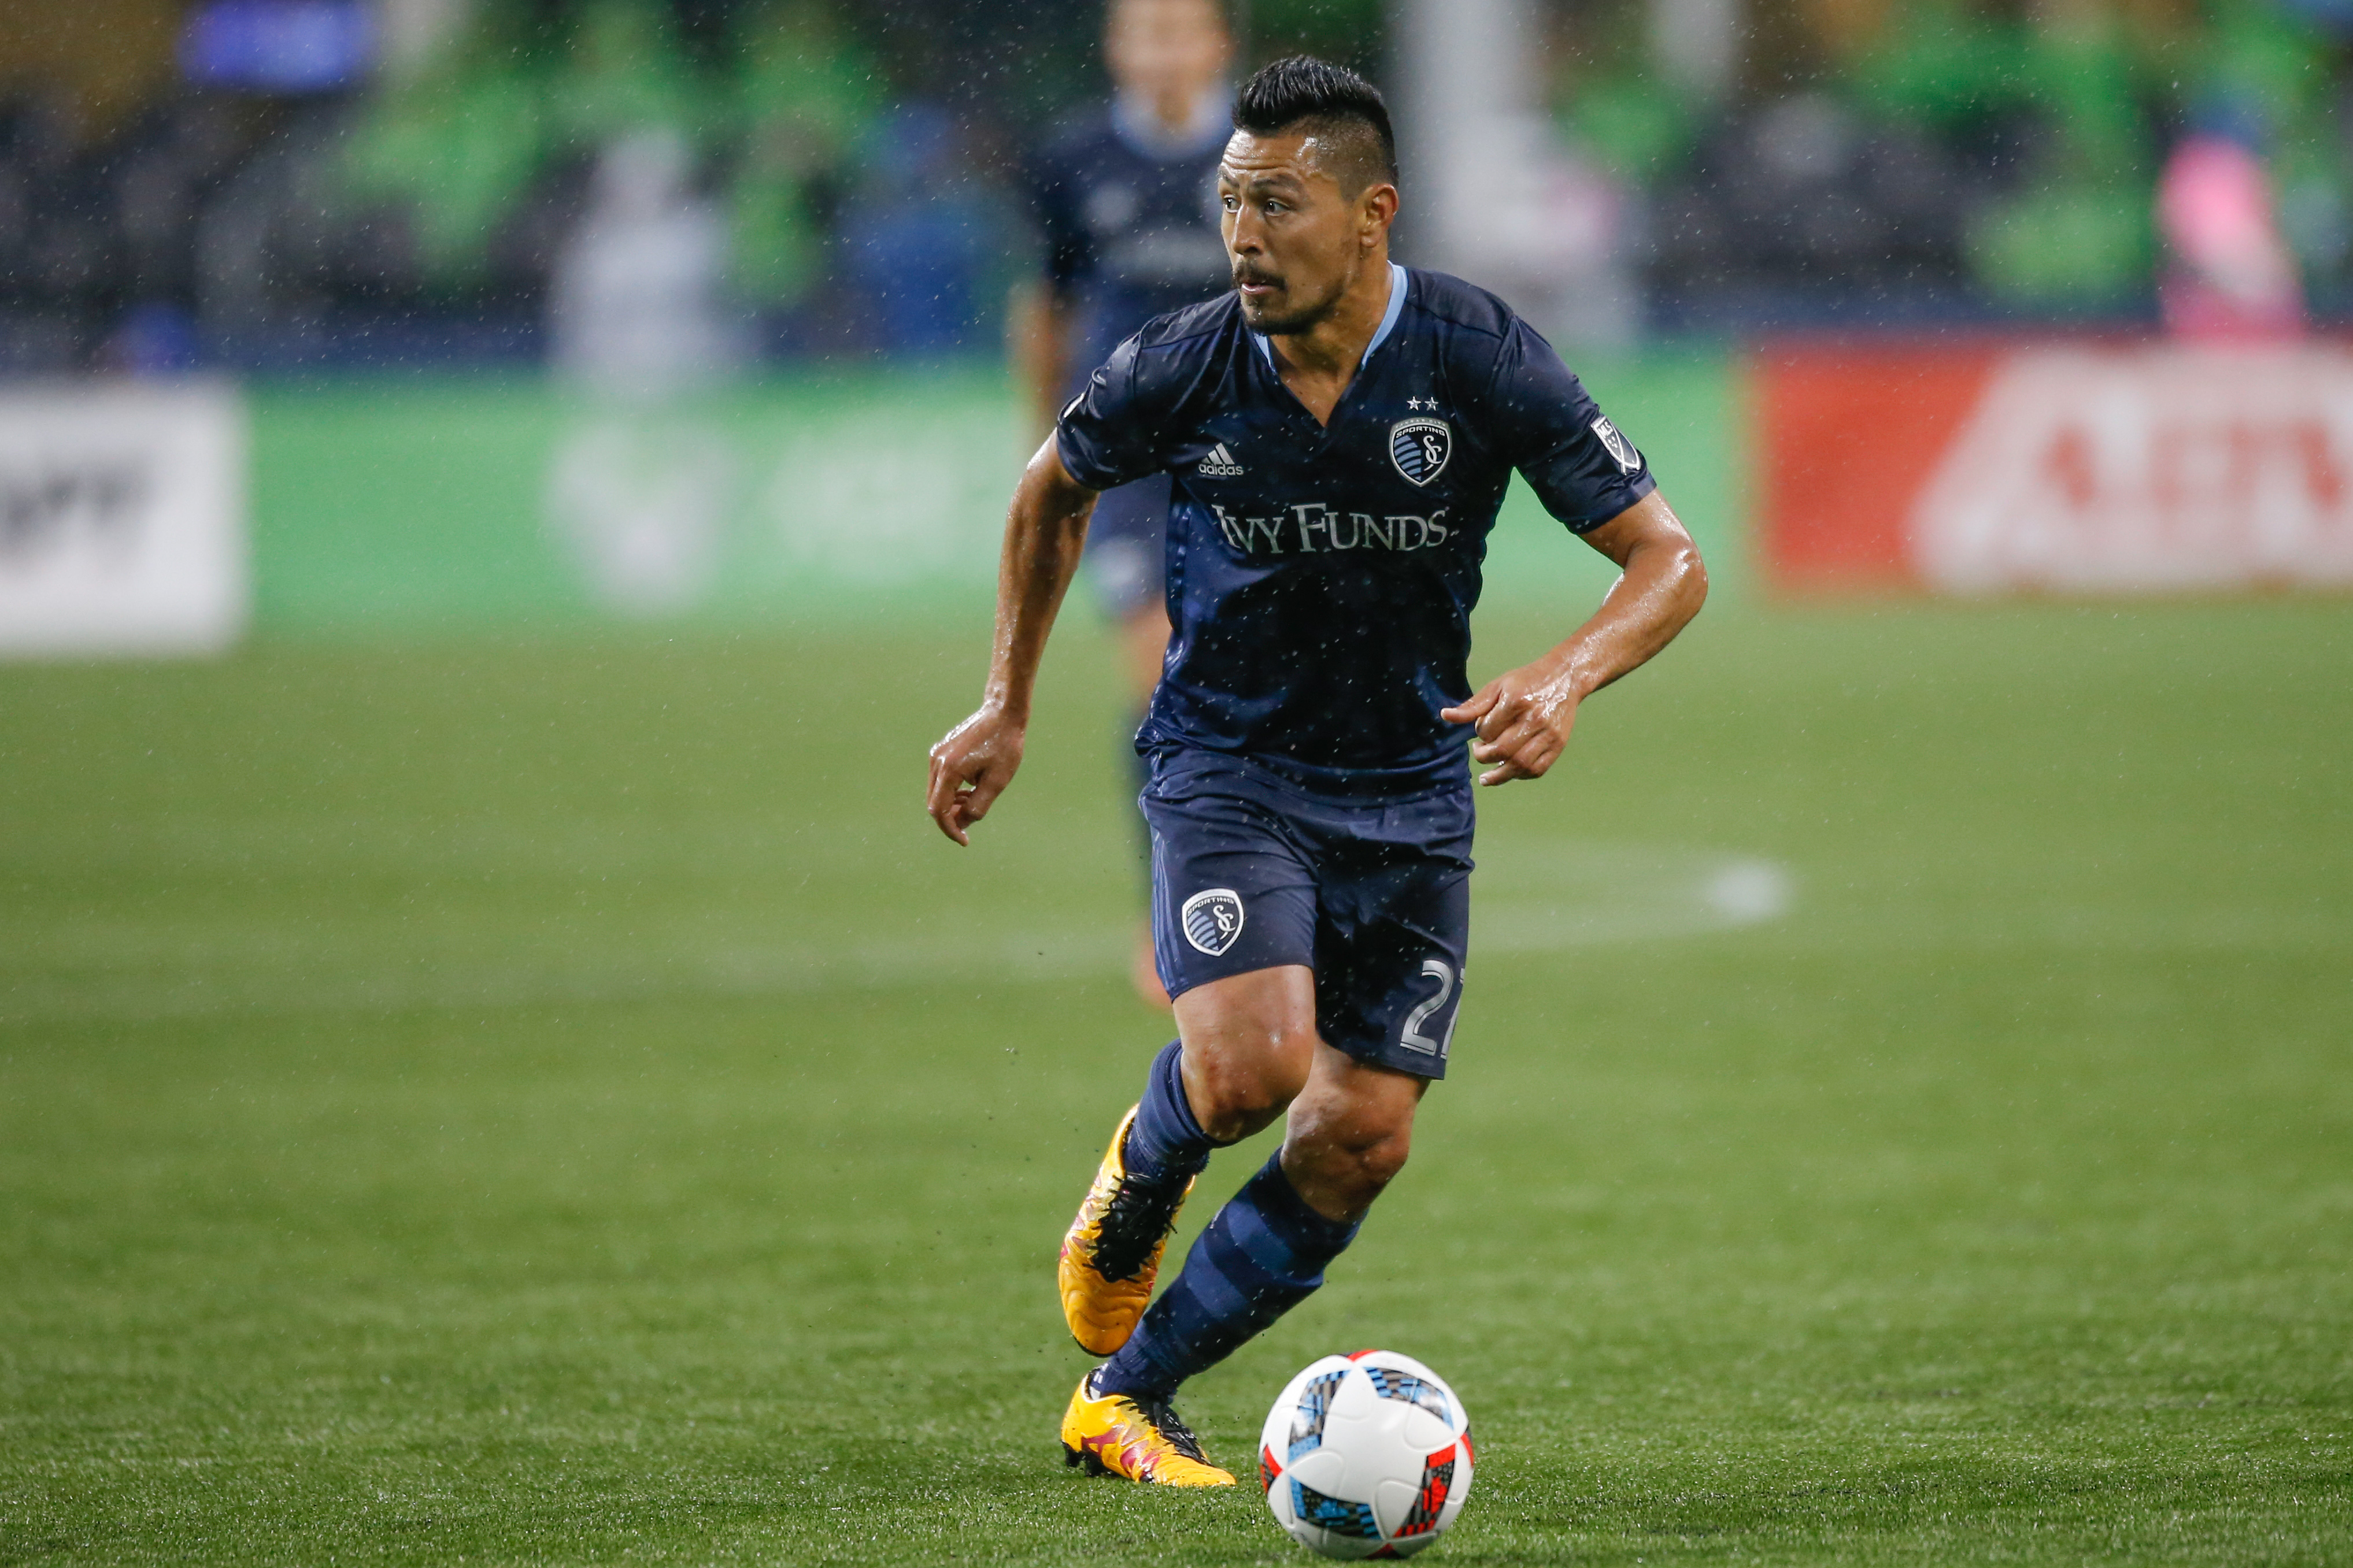 Sporting KC have their midfield roles cockeyed